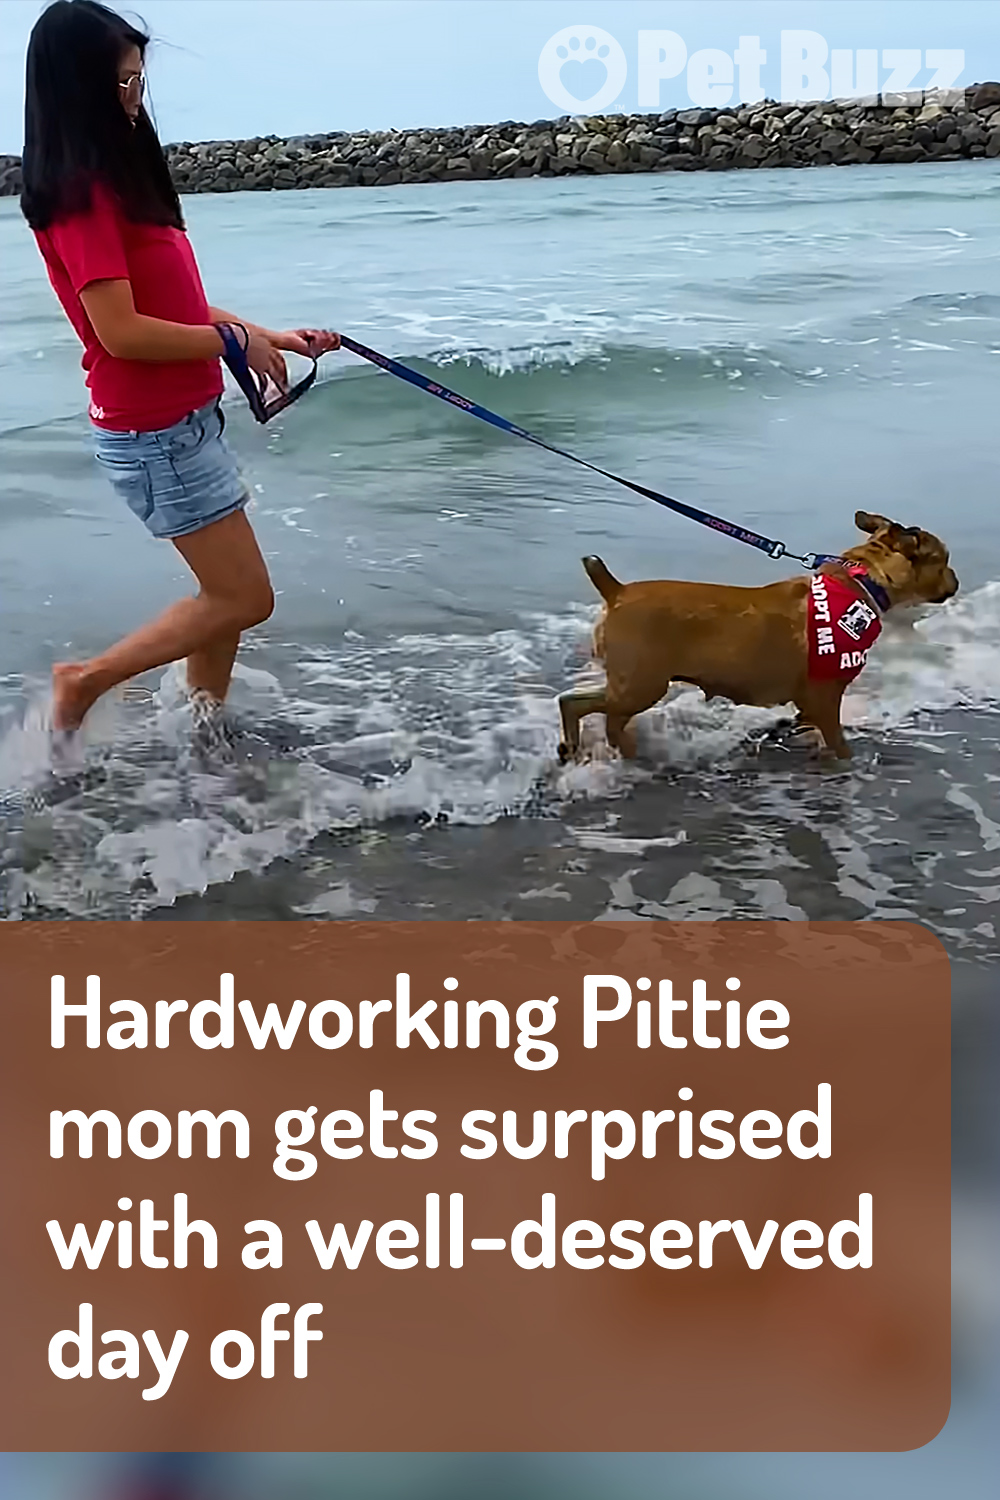 Hardworking Pittie mom gets surprised with a well-deserved day off